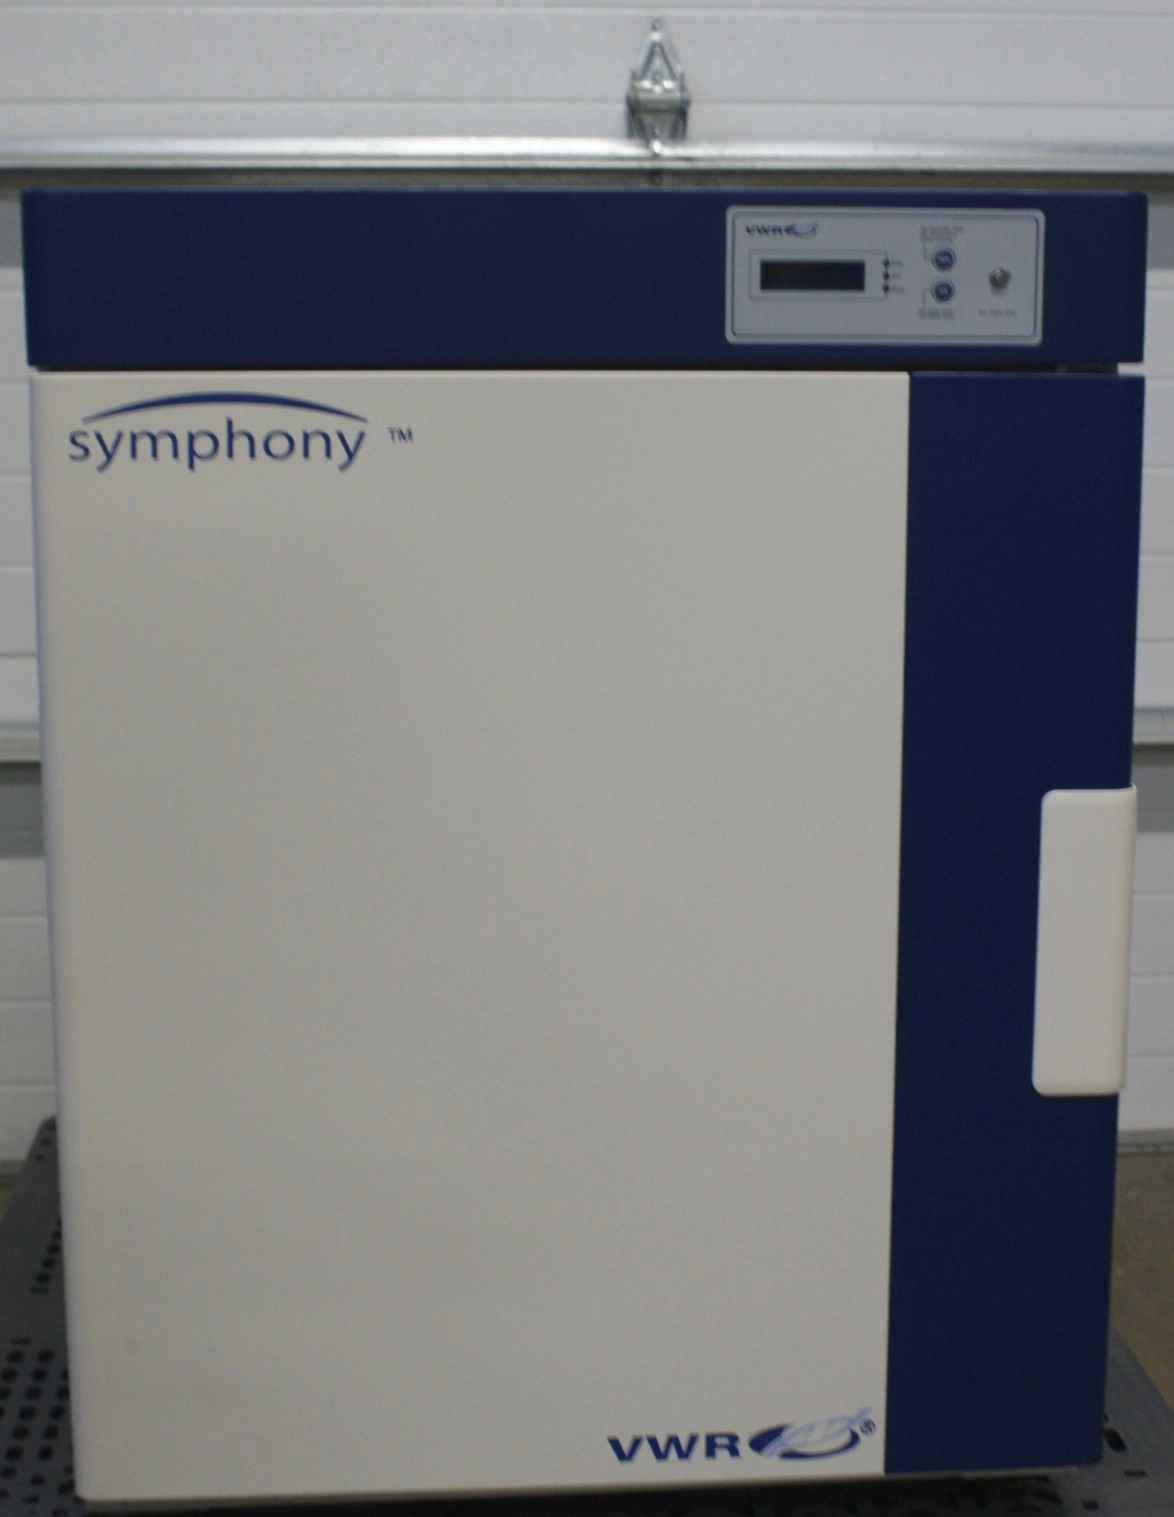 VWR Symphony 414004-568 VWR 414004-568 Forced Air Oven; 155 L (5.4 cuft); 120V/60Hz used nice oven